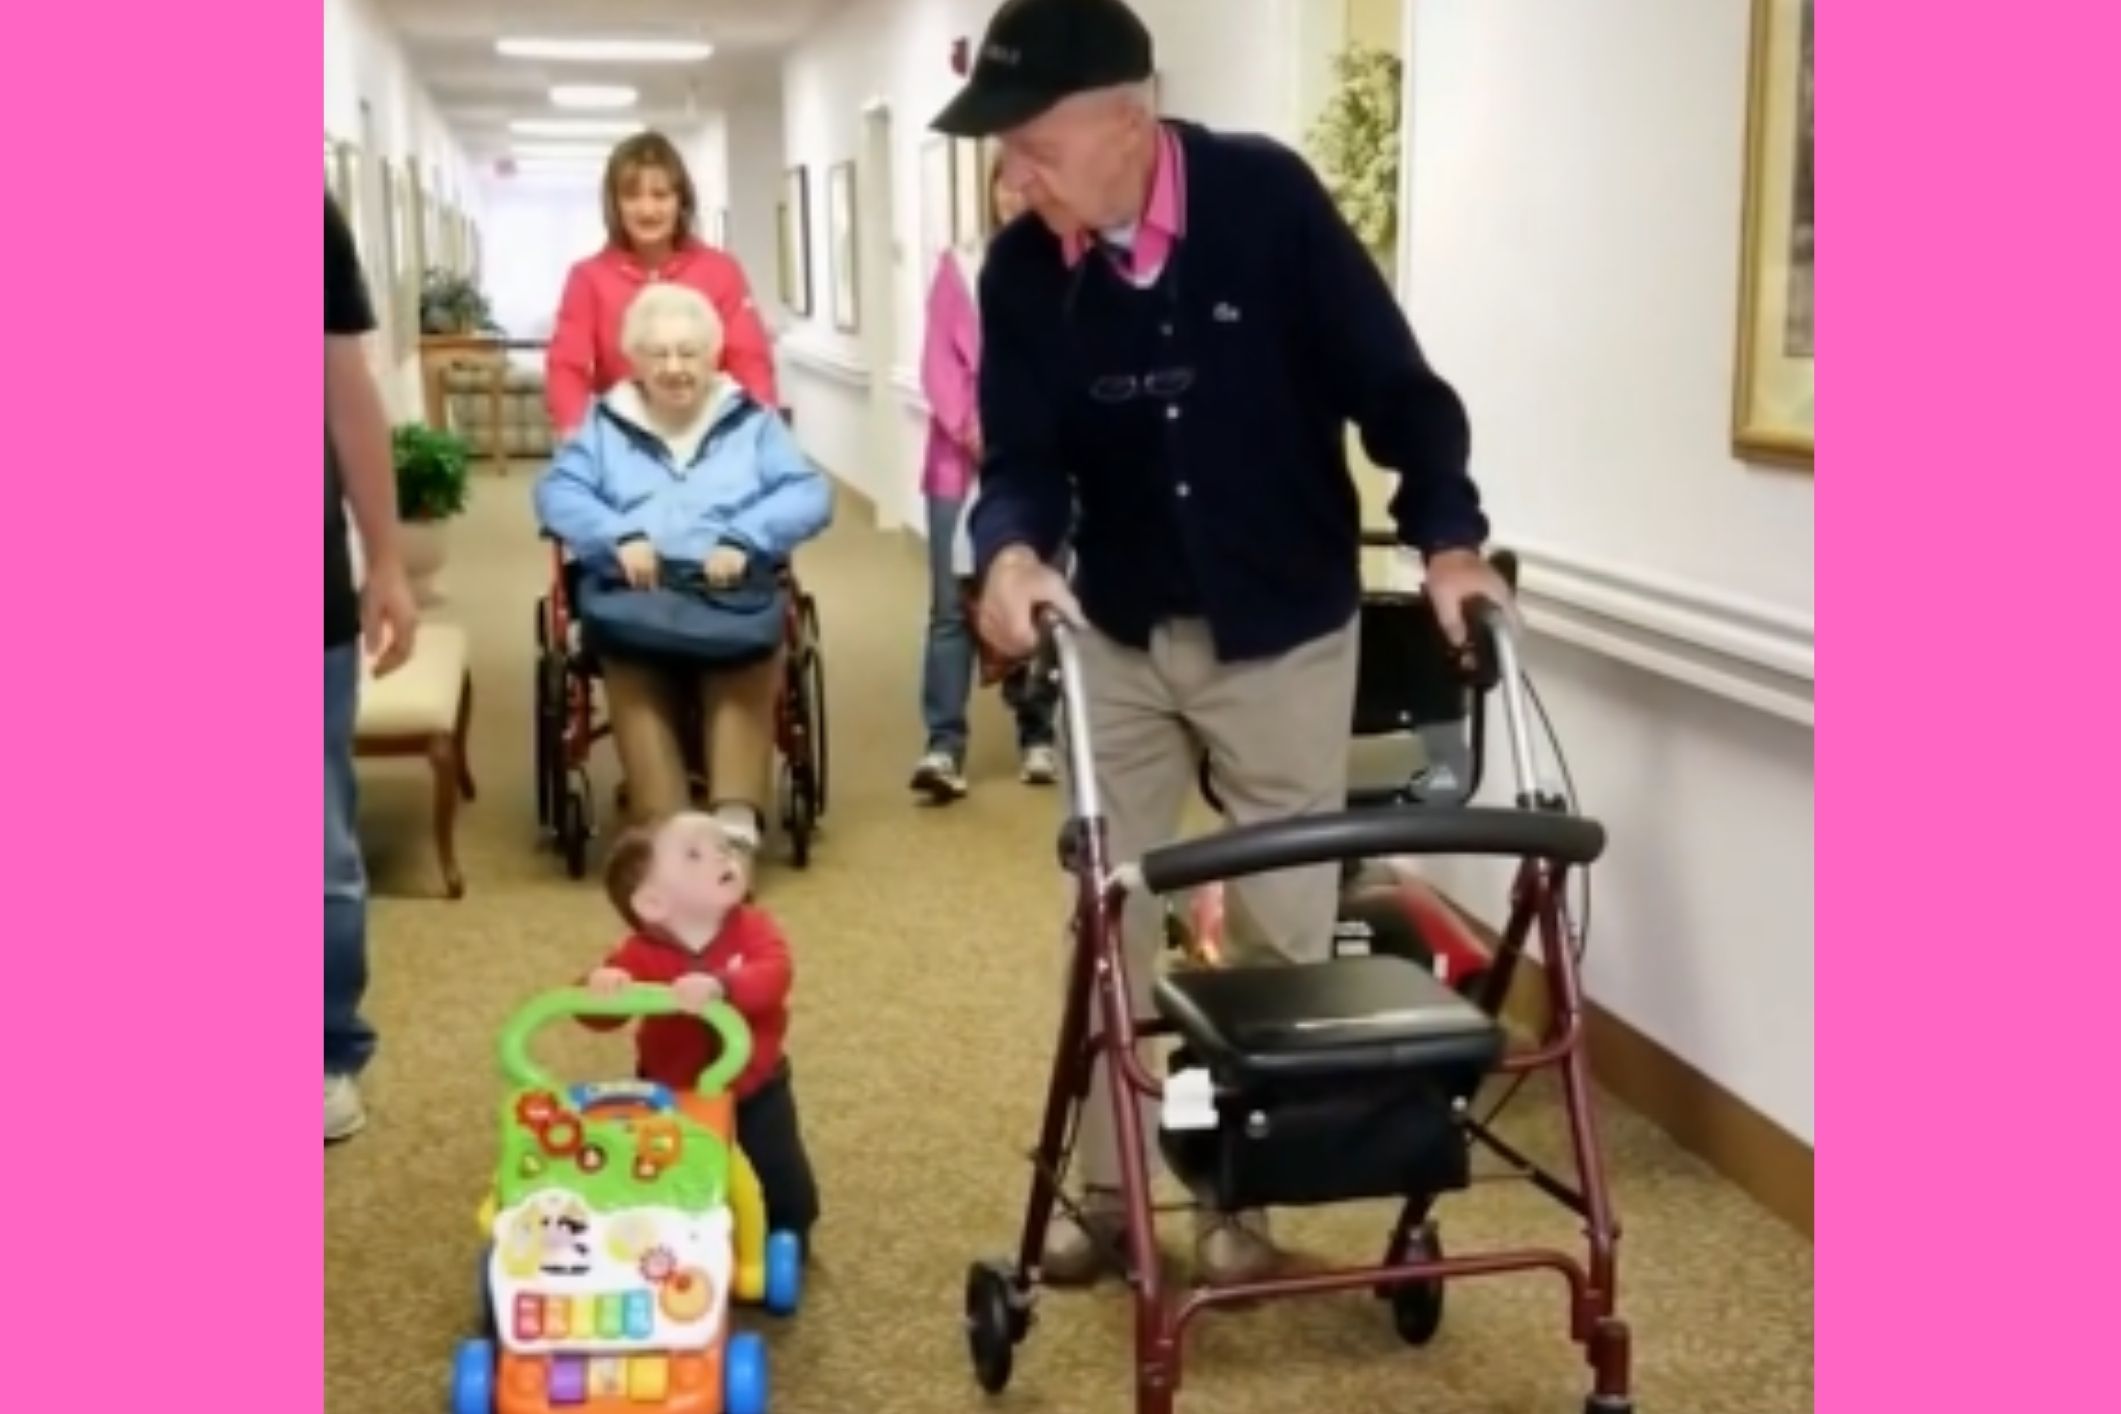 Spurring each other on, Great-Grandfather and baby use walkers in unison